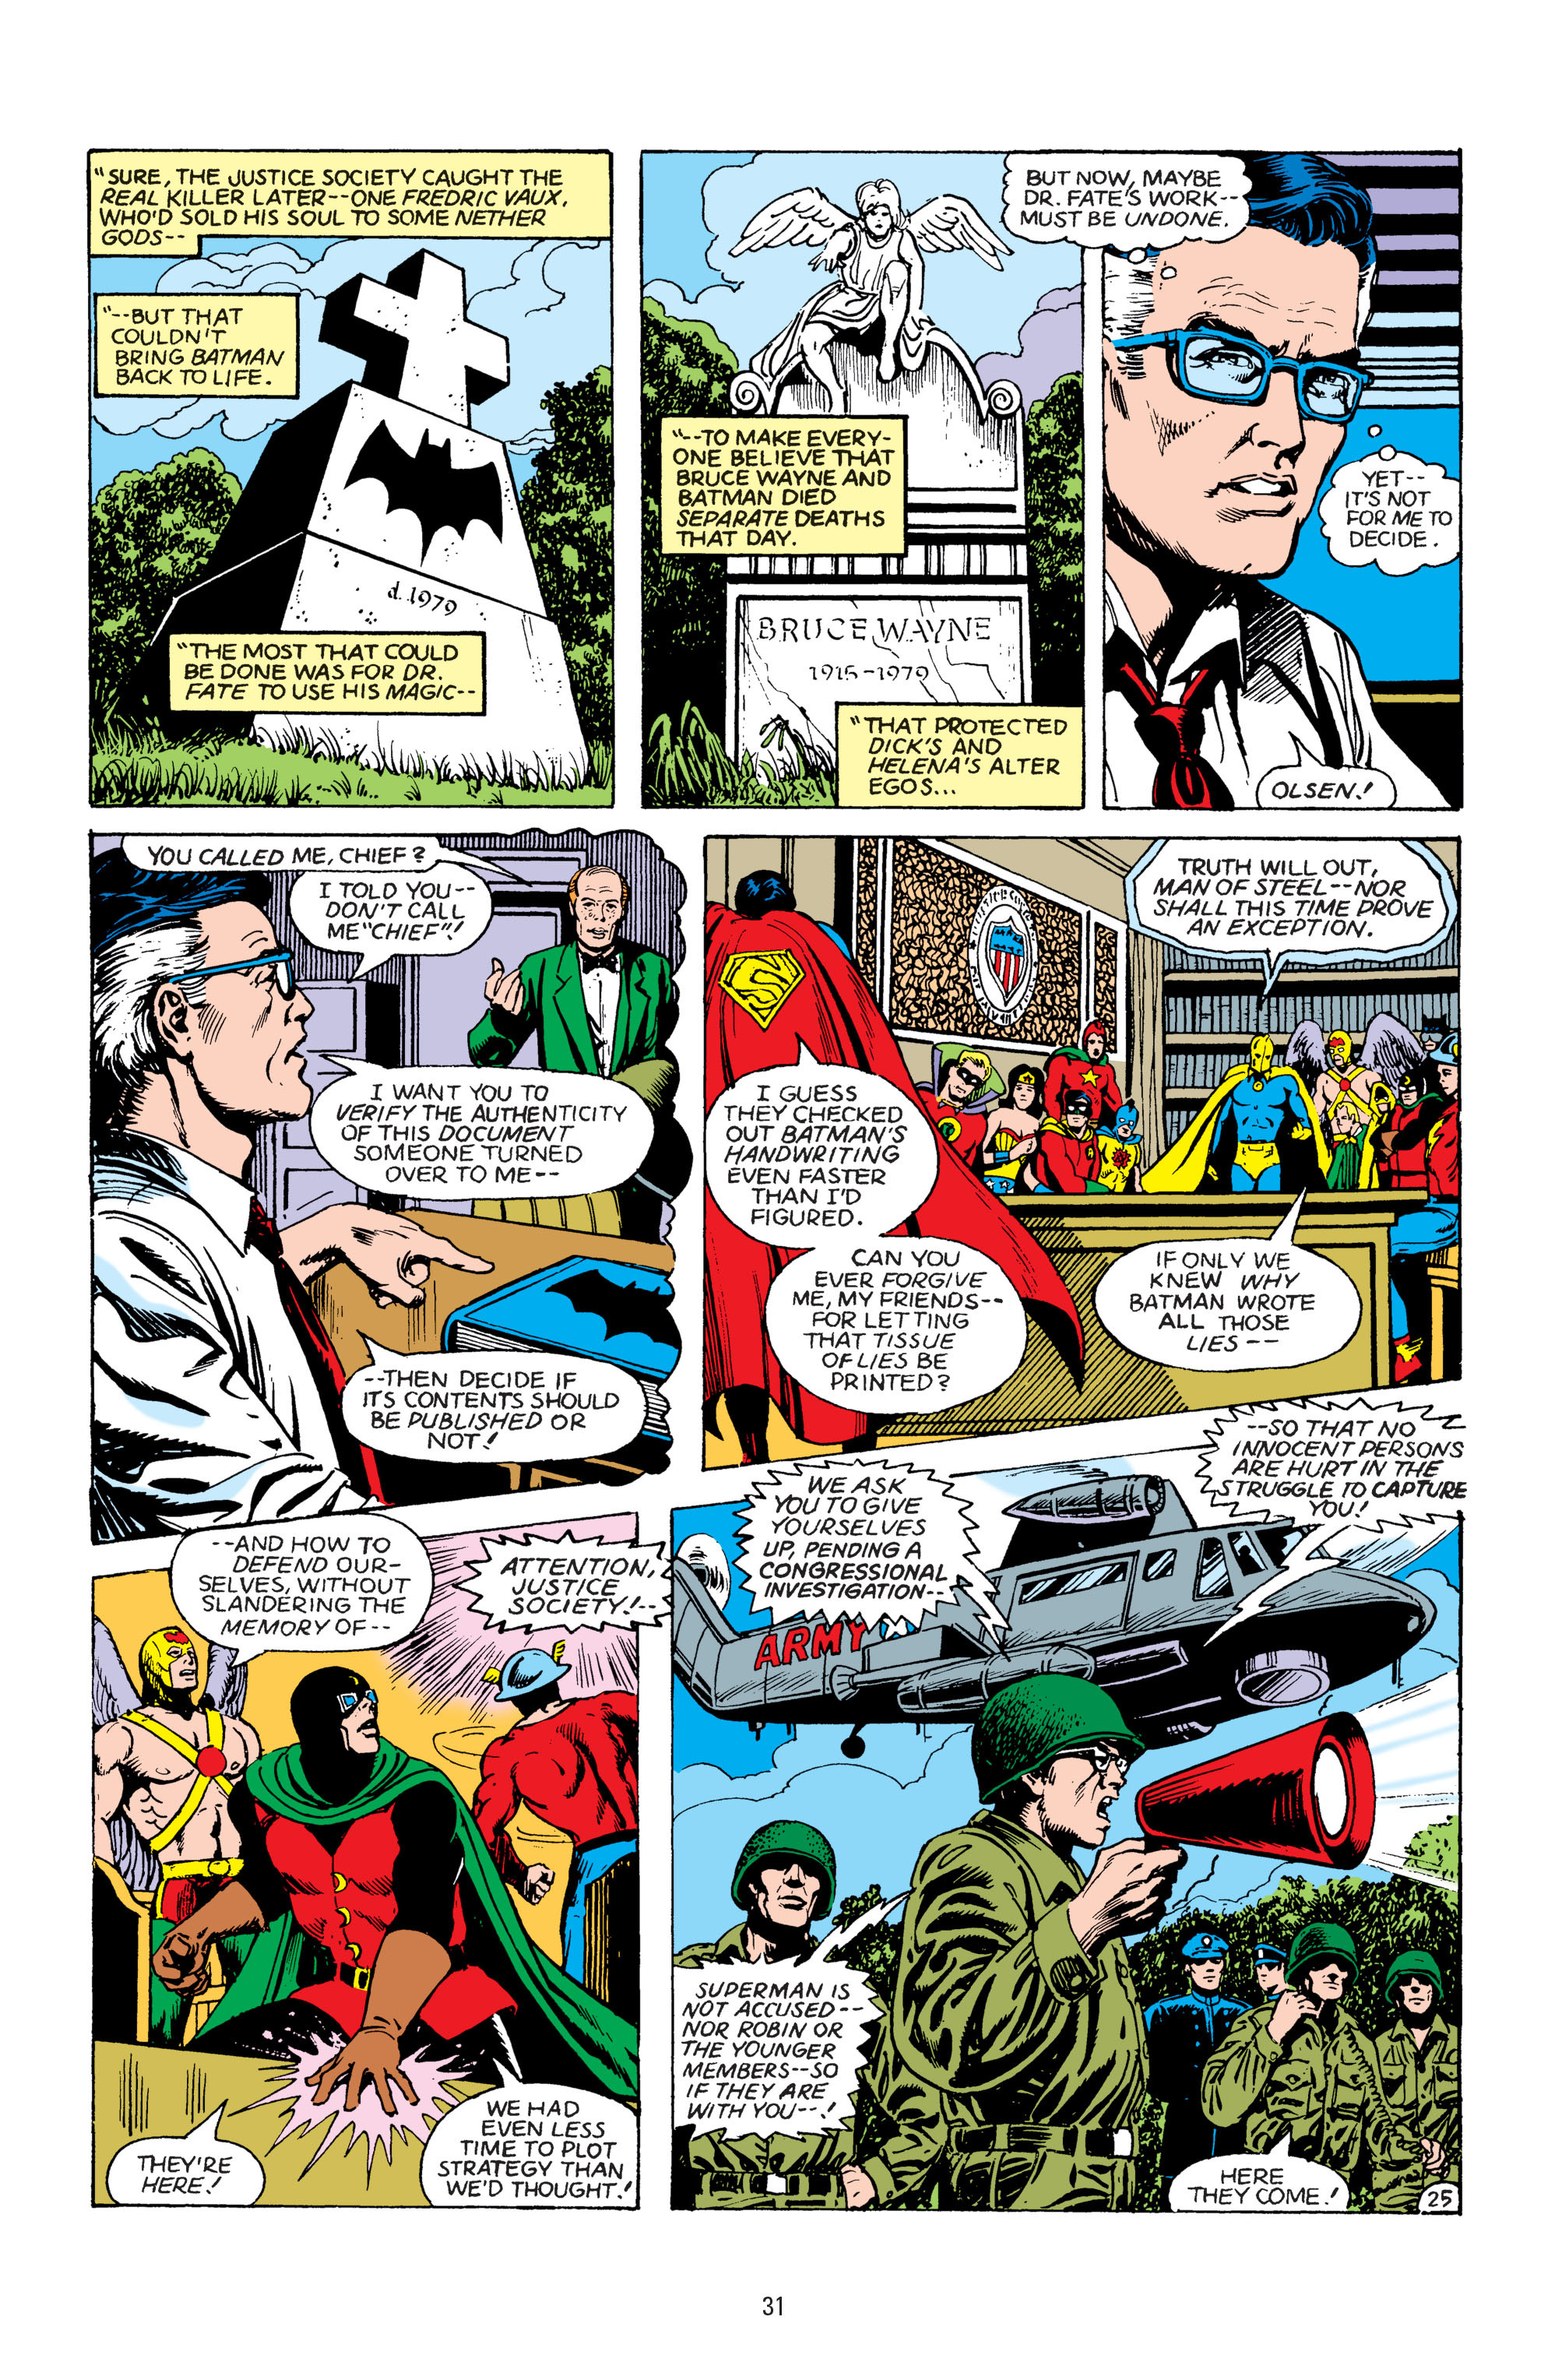 Read online America vs. the Justice Society comic -  Issue # TPB - 30